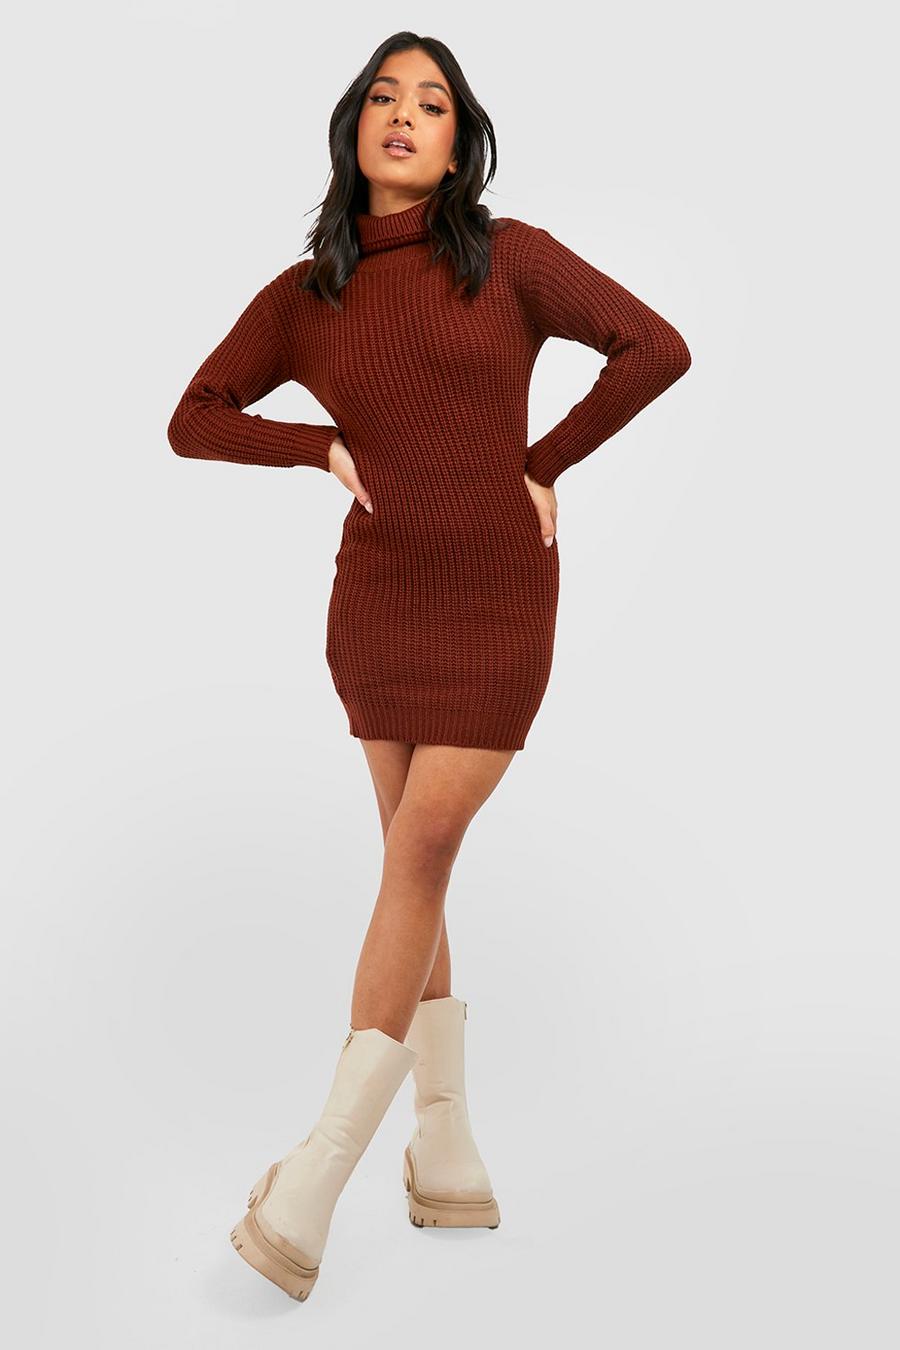 Mahogany brun Recycled Petite Roll Neck Jumper Dress image number 1